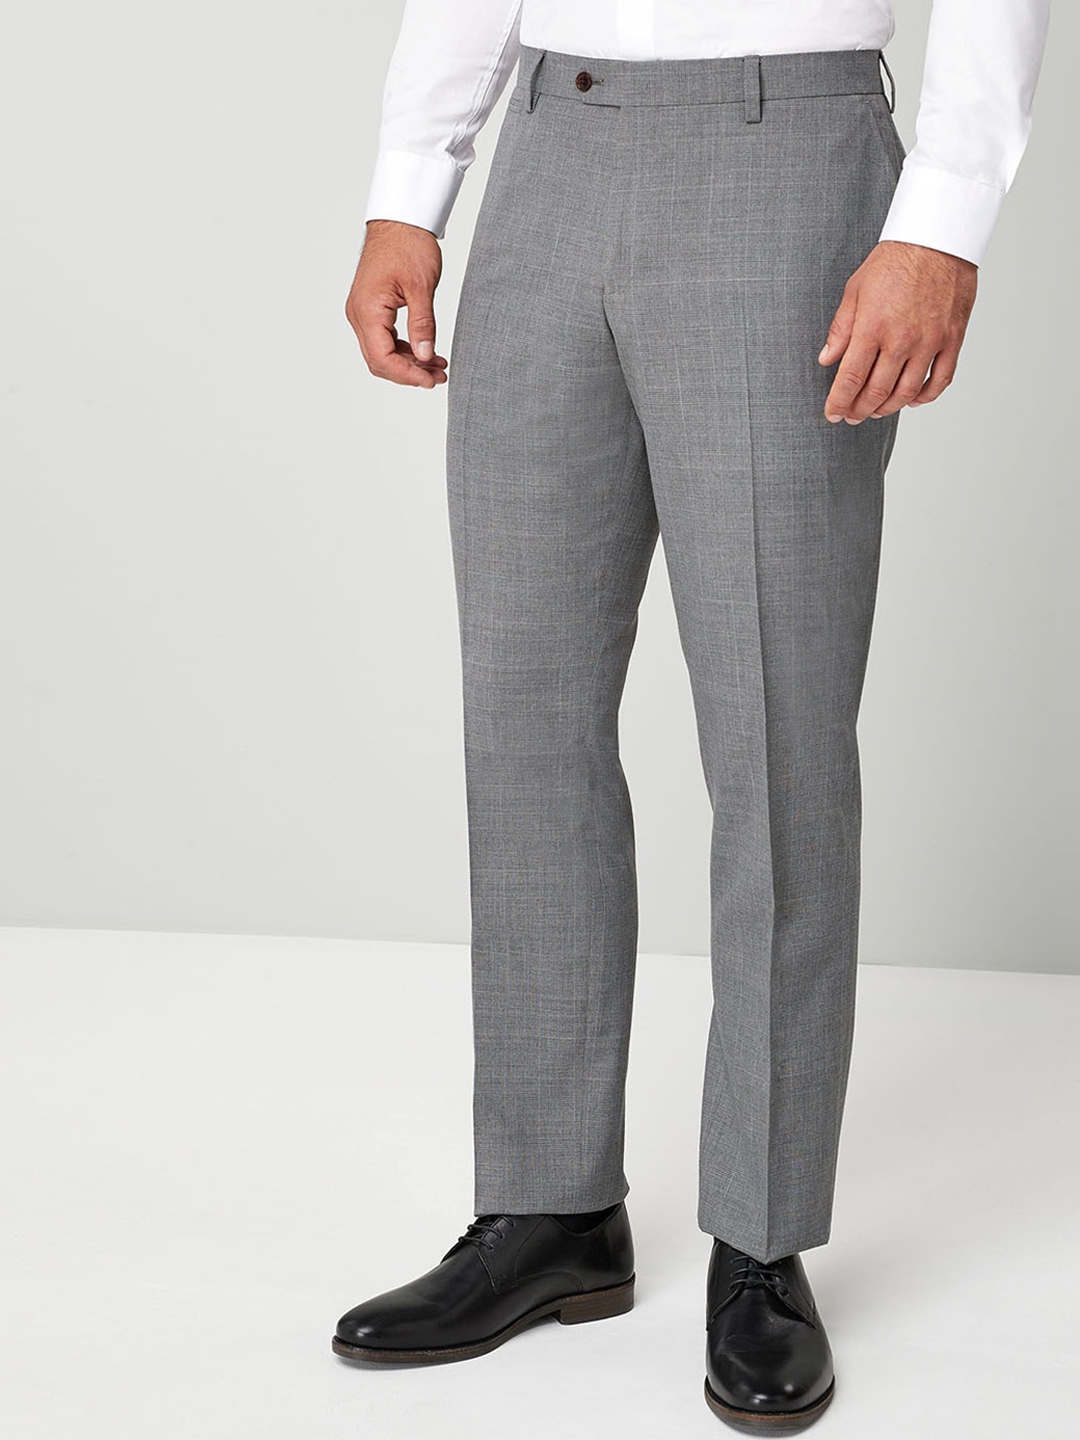 Top more than 80 next check trousers - in.cdgdbentre